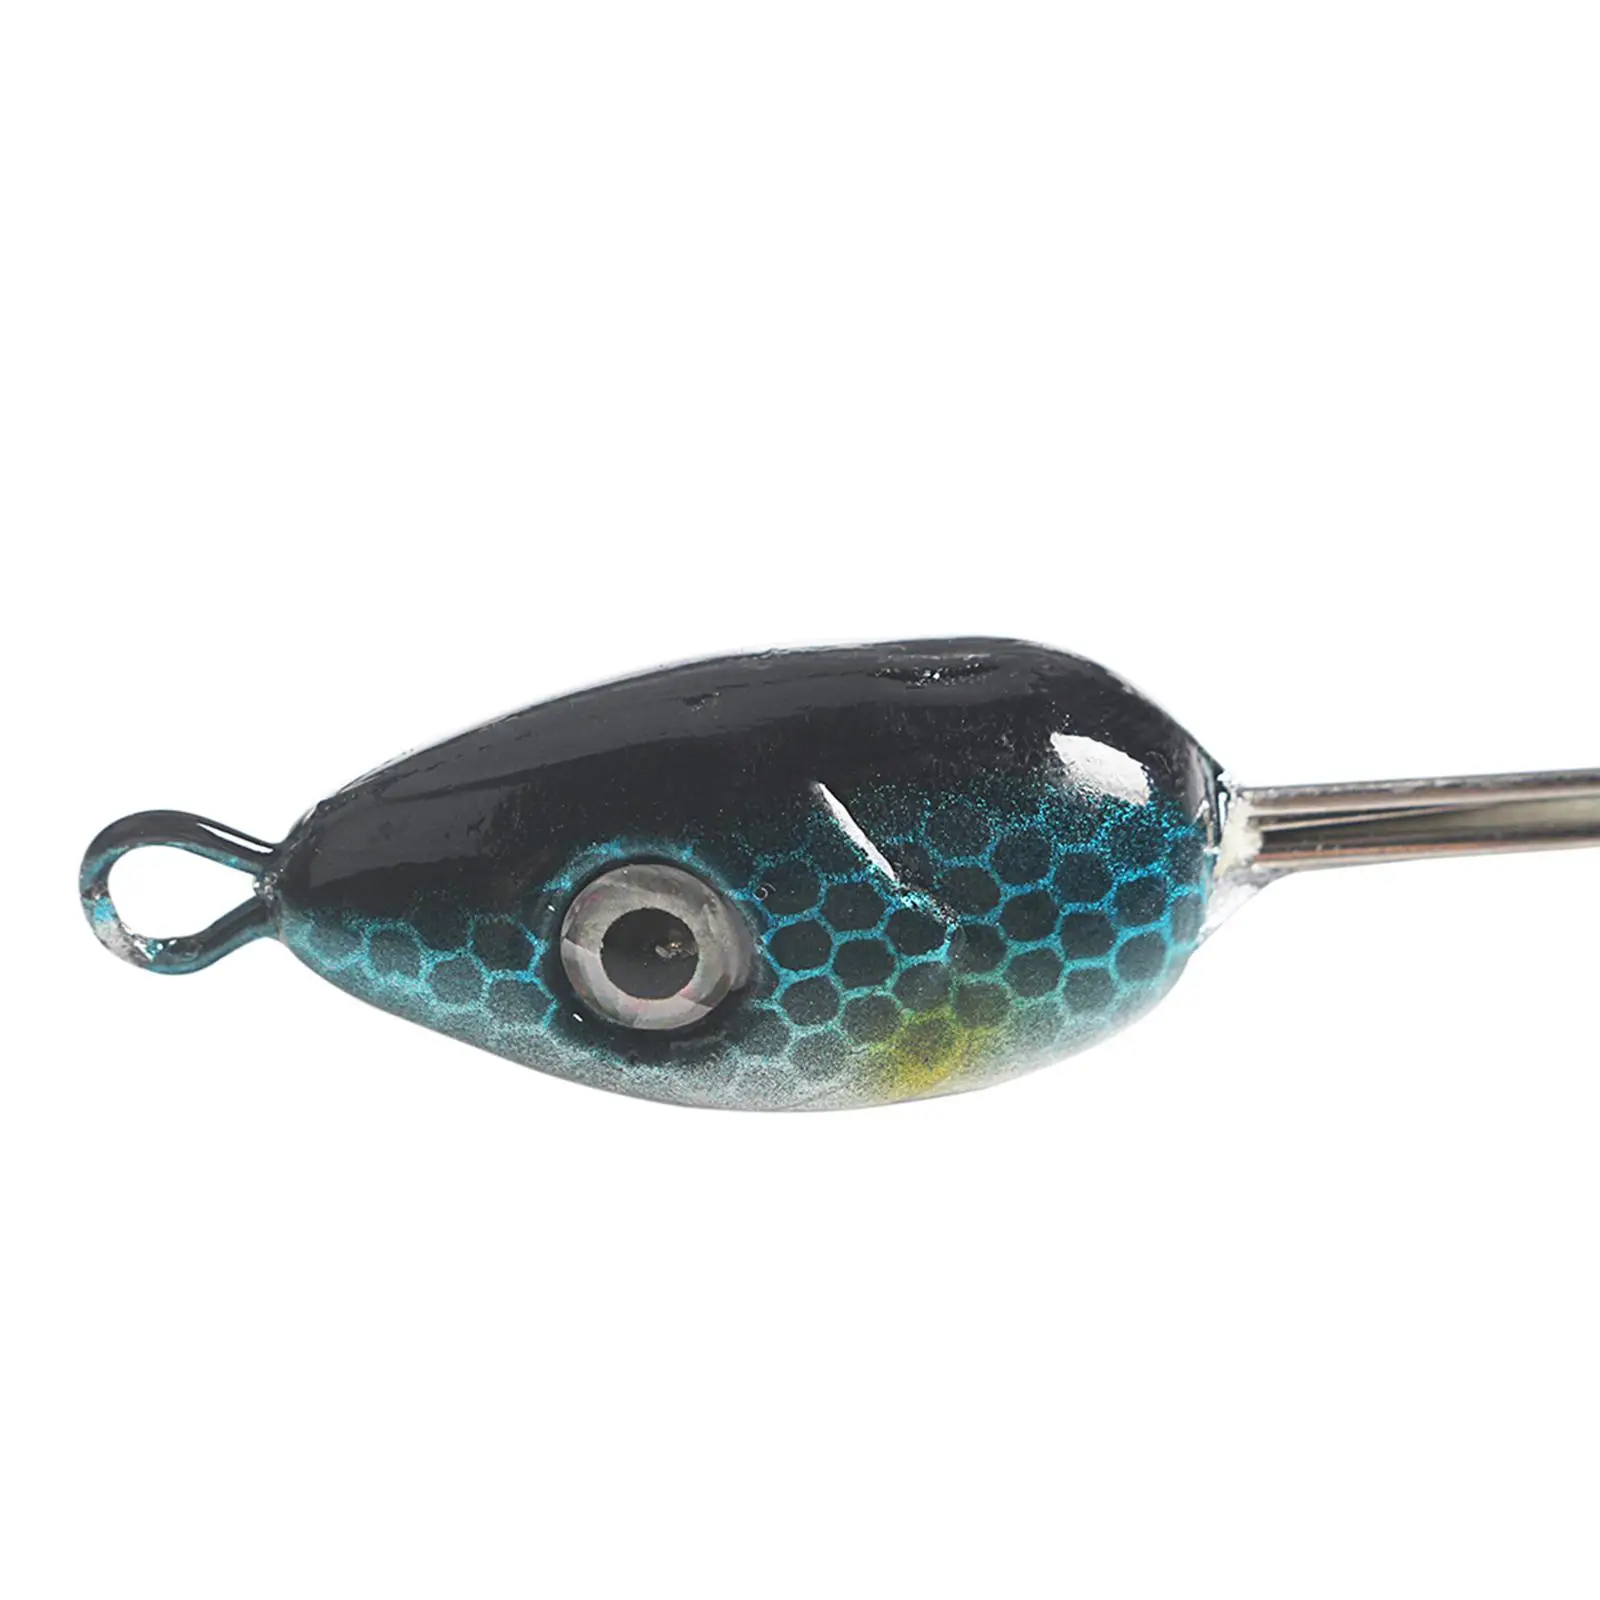 https://ae01.alicdn.com/kf/Se9721c81ef534514a2011d5ca1c0c163a/Umbrella-Rig-Freshwater-saltwater-for-Boat-Trolling-Fishing-Rig-Set-A-Rig-Fishing-Lure-for-Perch.jpg